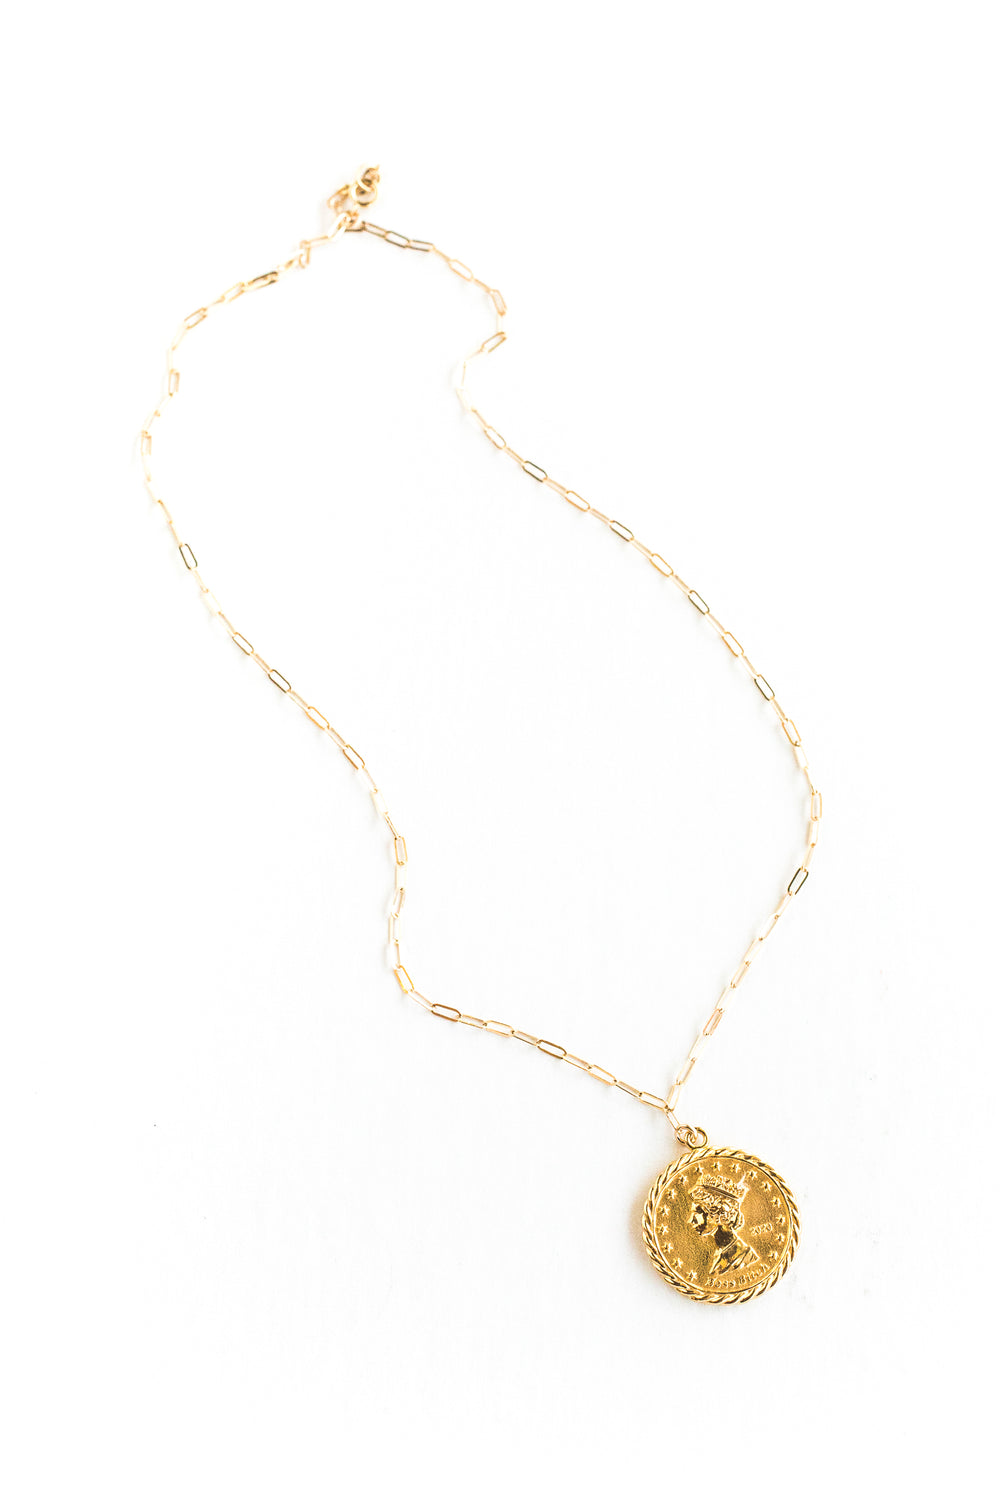 Gold Queen B Necklace